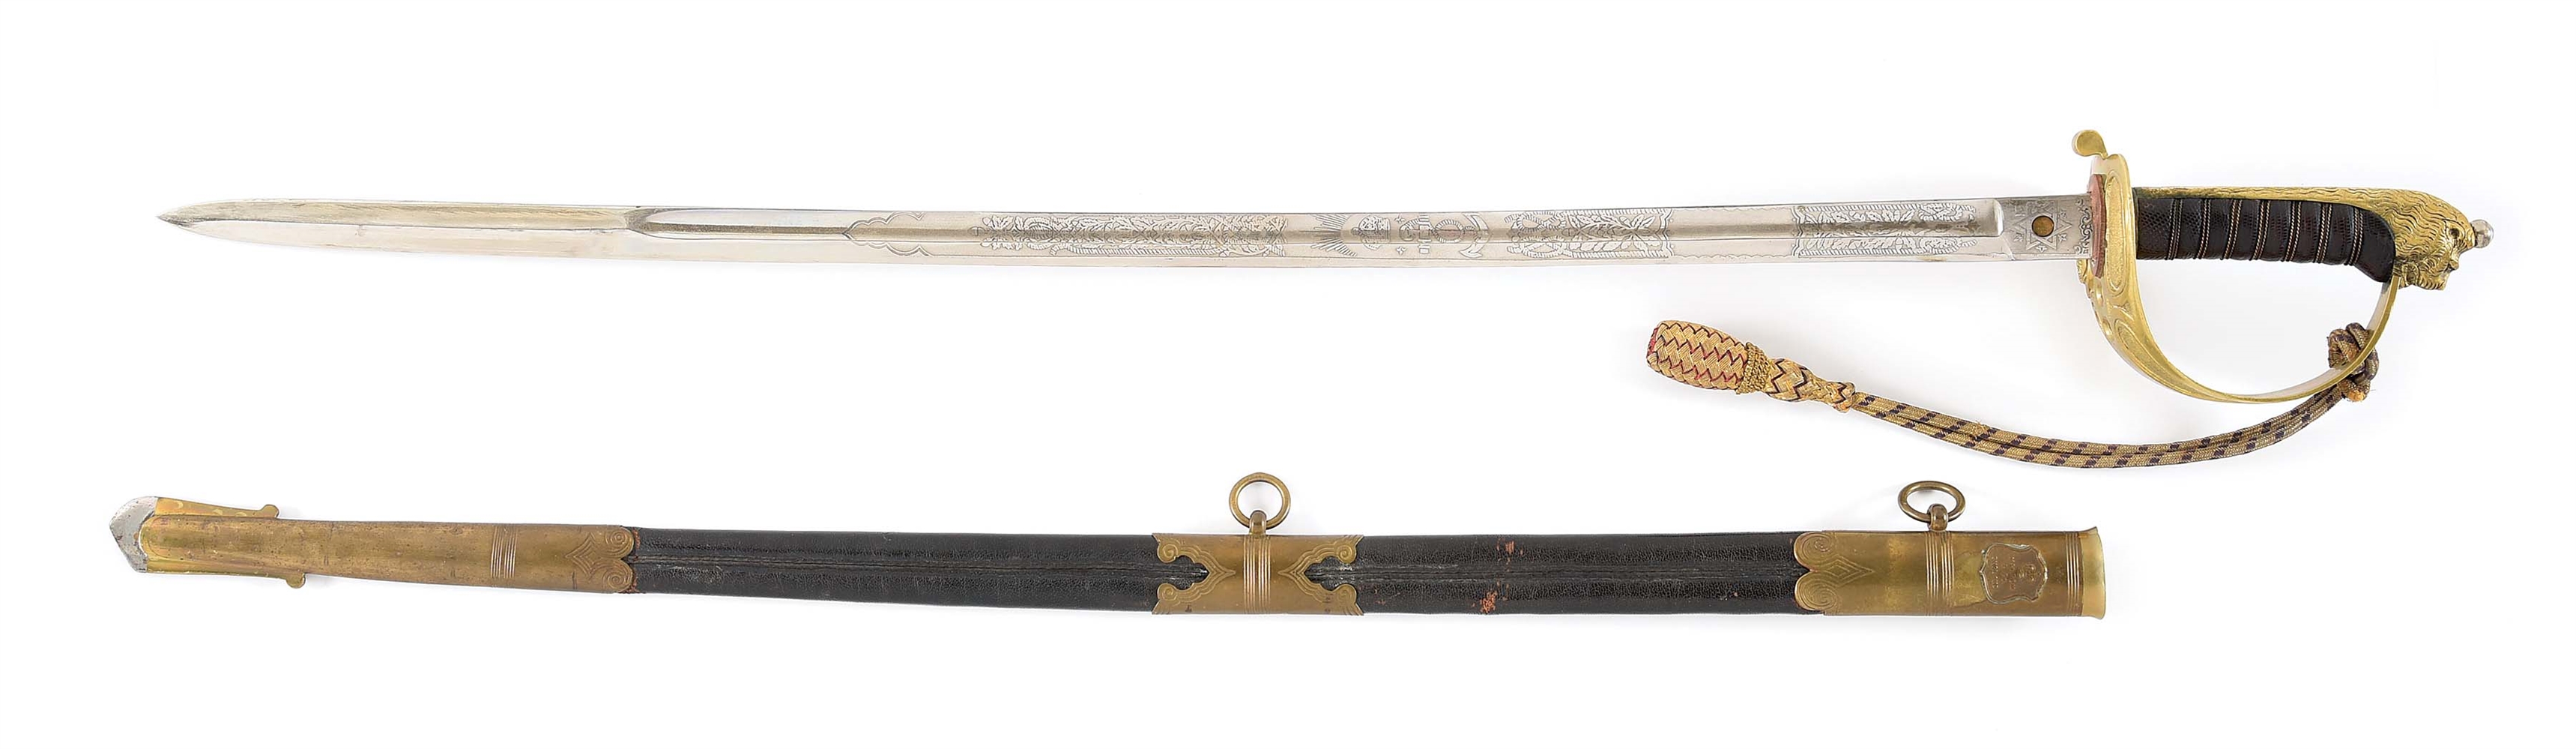 BRITISH PATTERN 1827 NAVAL OFFICERS SWORD BY MANTON & CO.